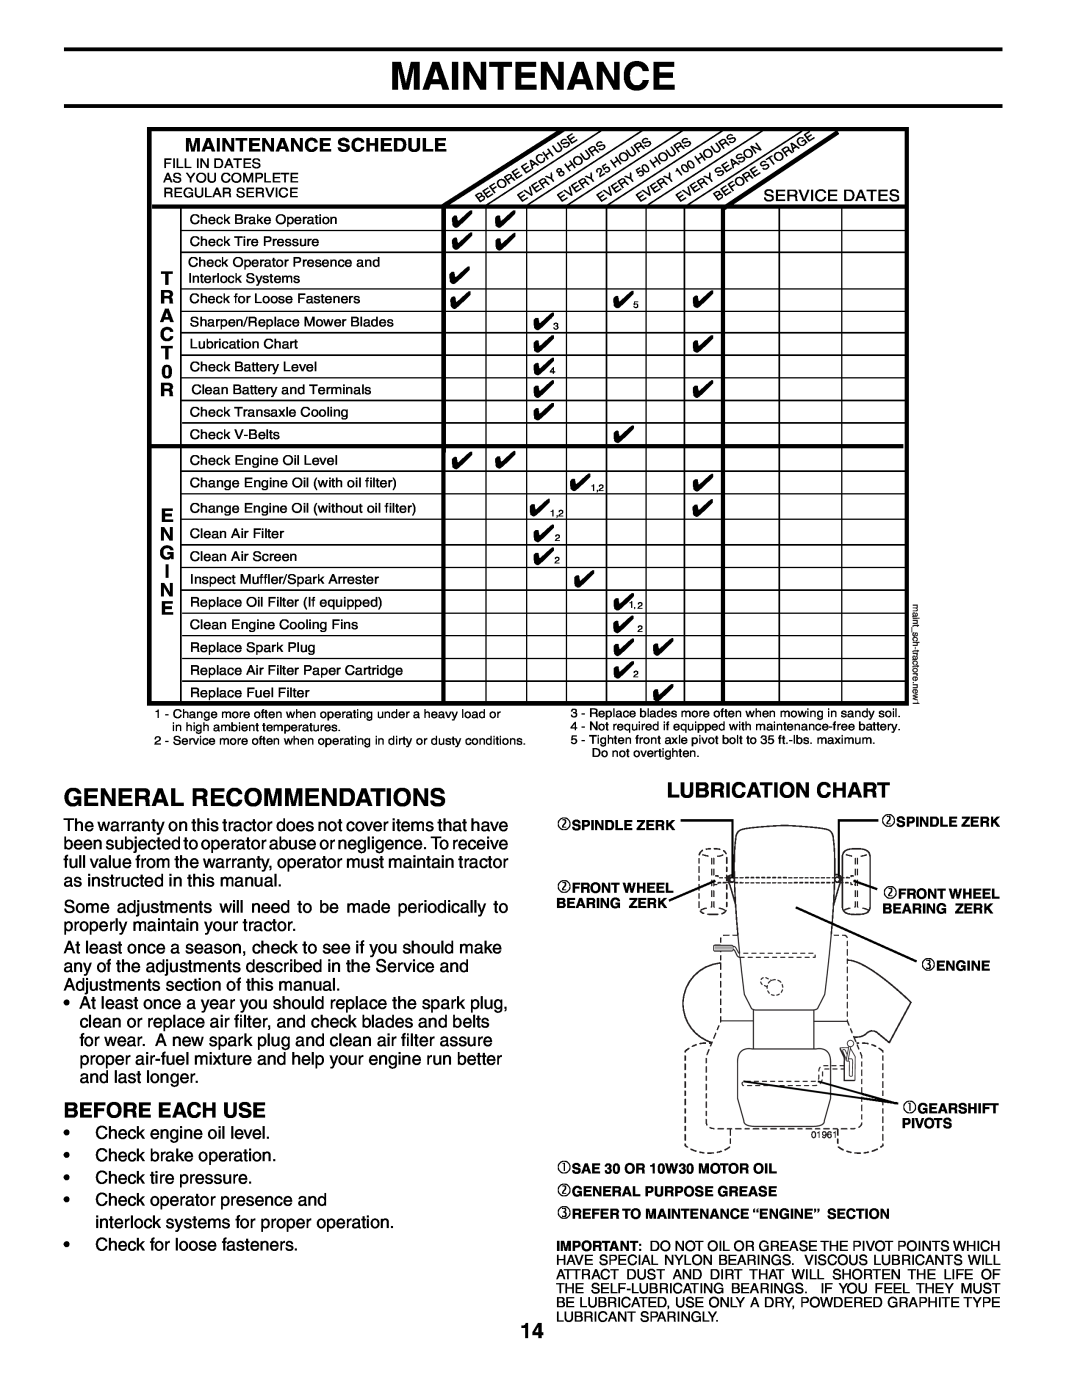 Poulan 192087 manual General Recommendations, Before Each Use, Lubrication Chart, Maintenance Schedule 